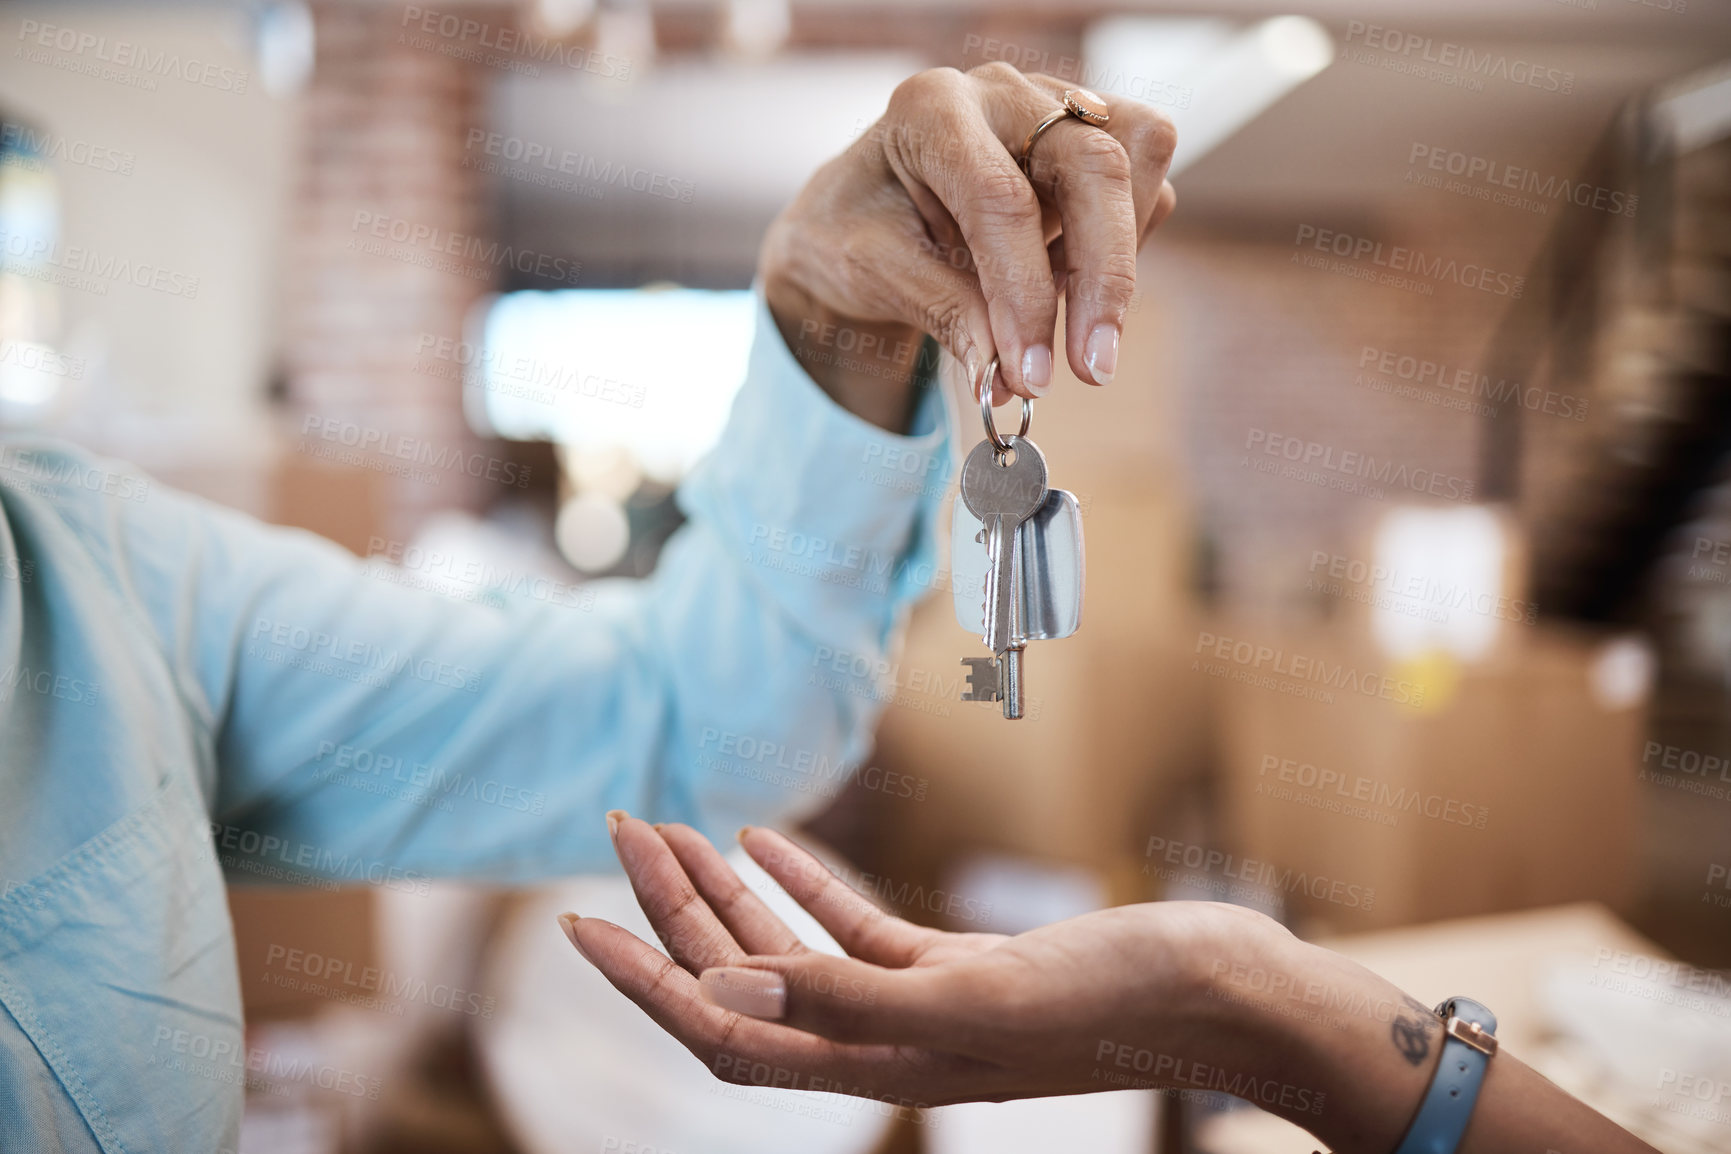 Buy stock photo Shot of an unrecognisable handing over the keys to a new house